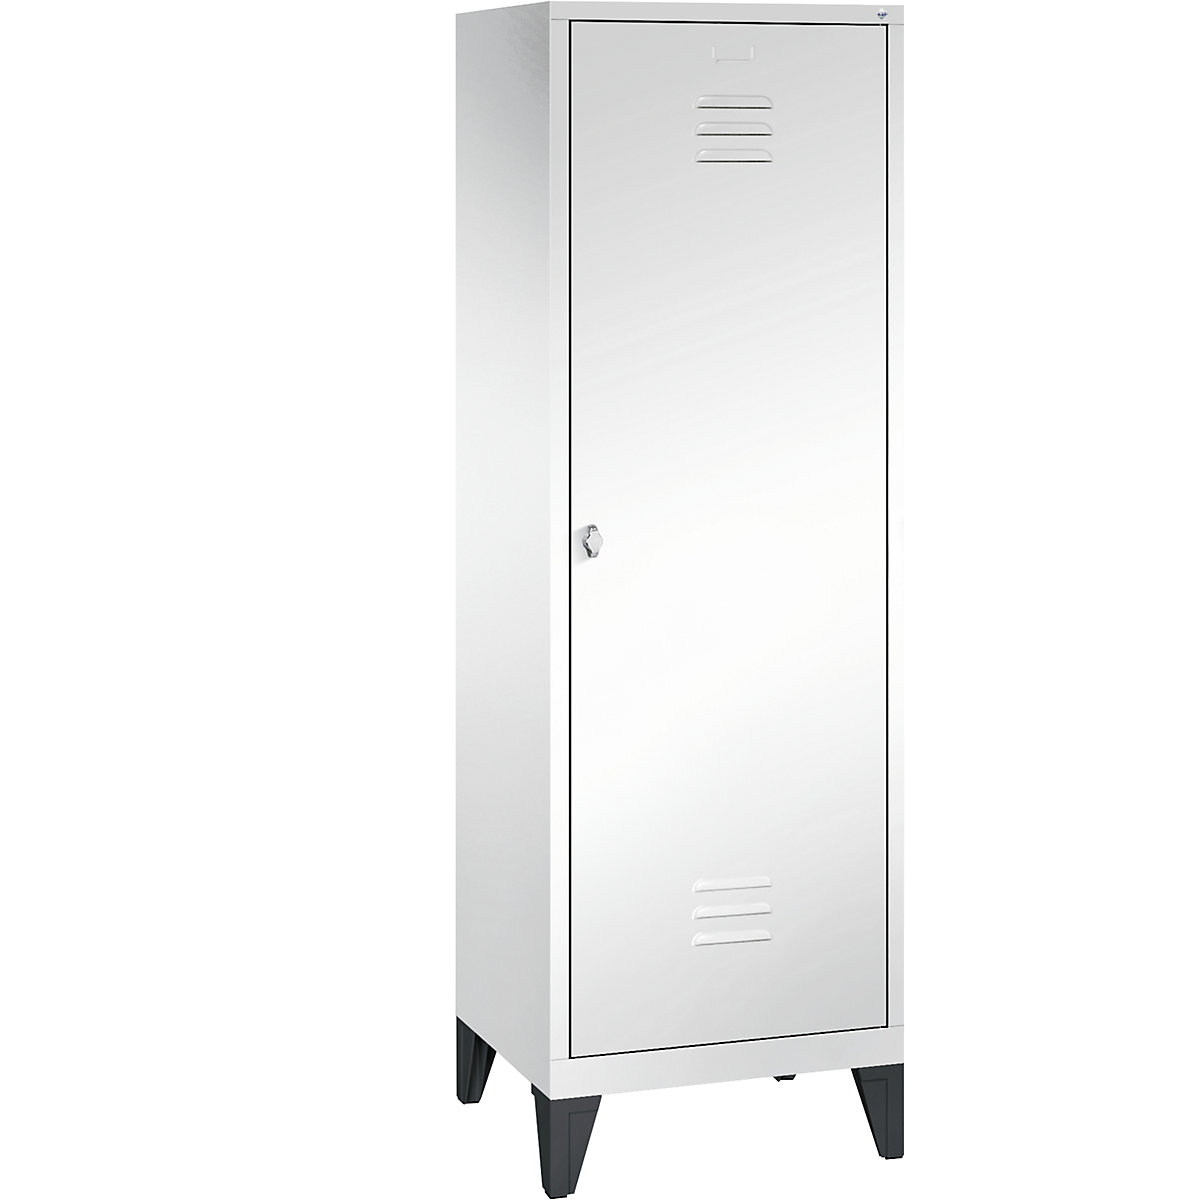 CLASSIC cloakroom locker with feet, door for 2 compartments - C+P